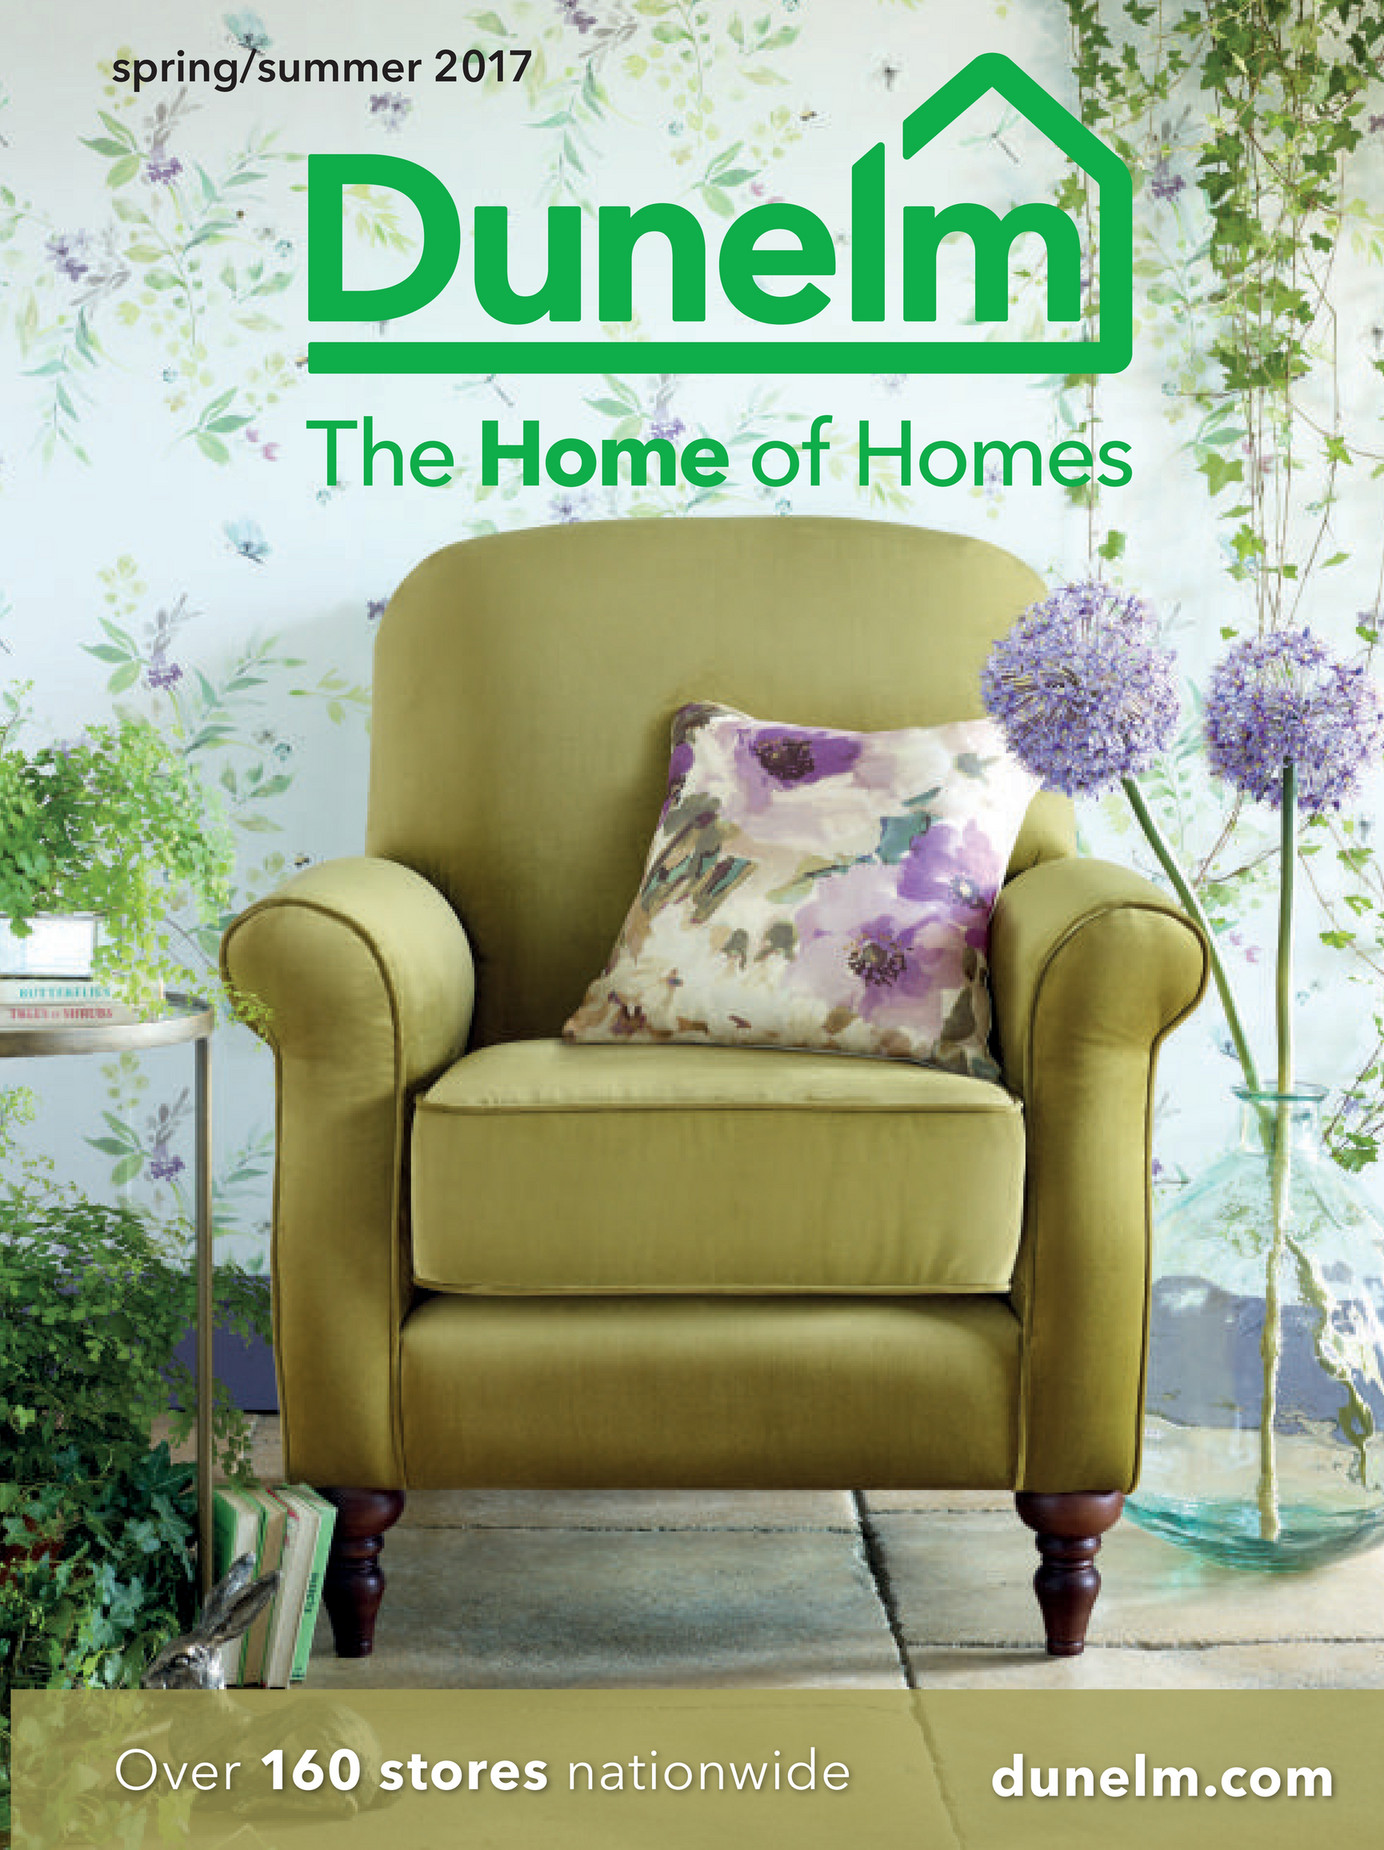 Dunelm - Spring / Summer 2017 Catalogue - Page 42-43